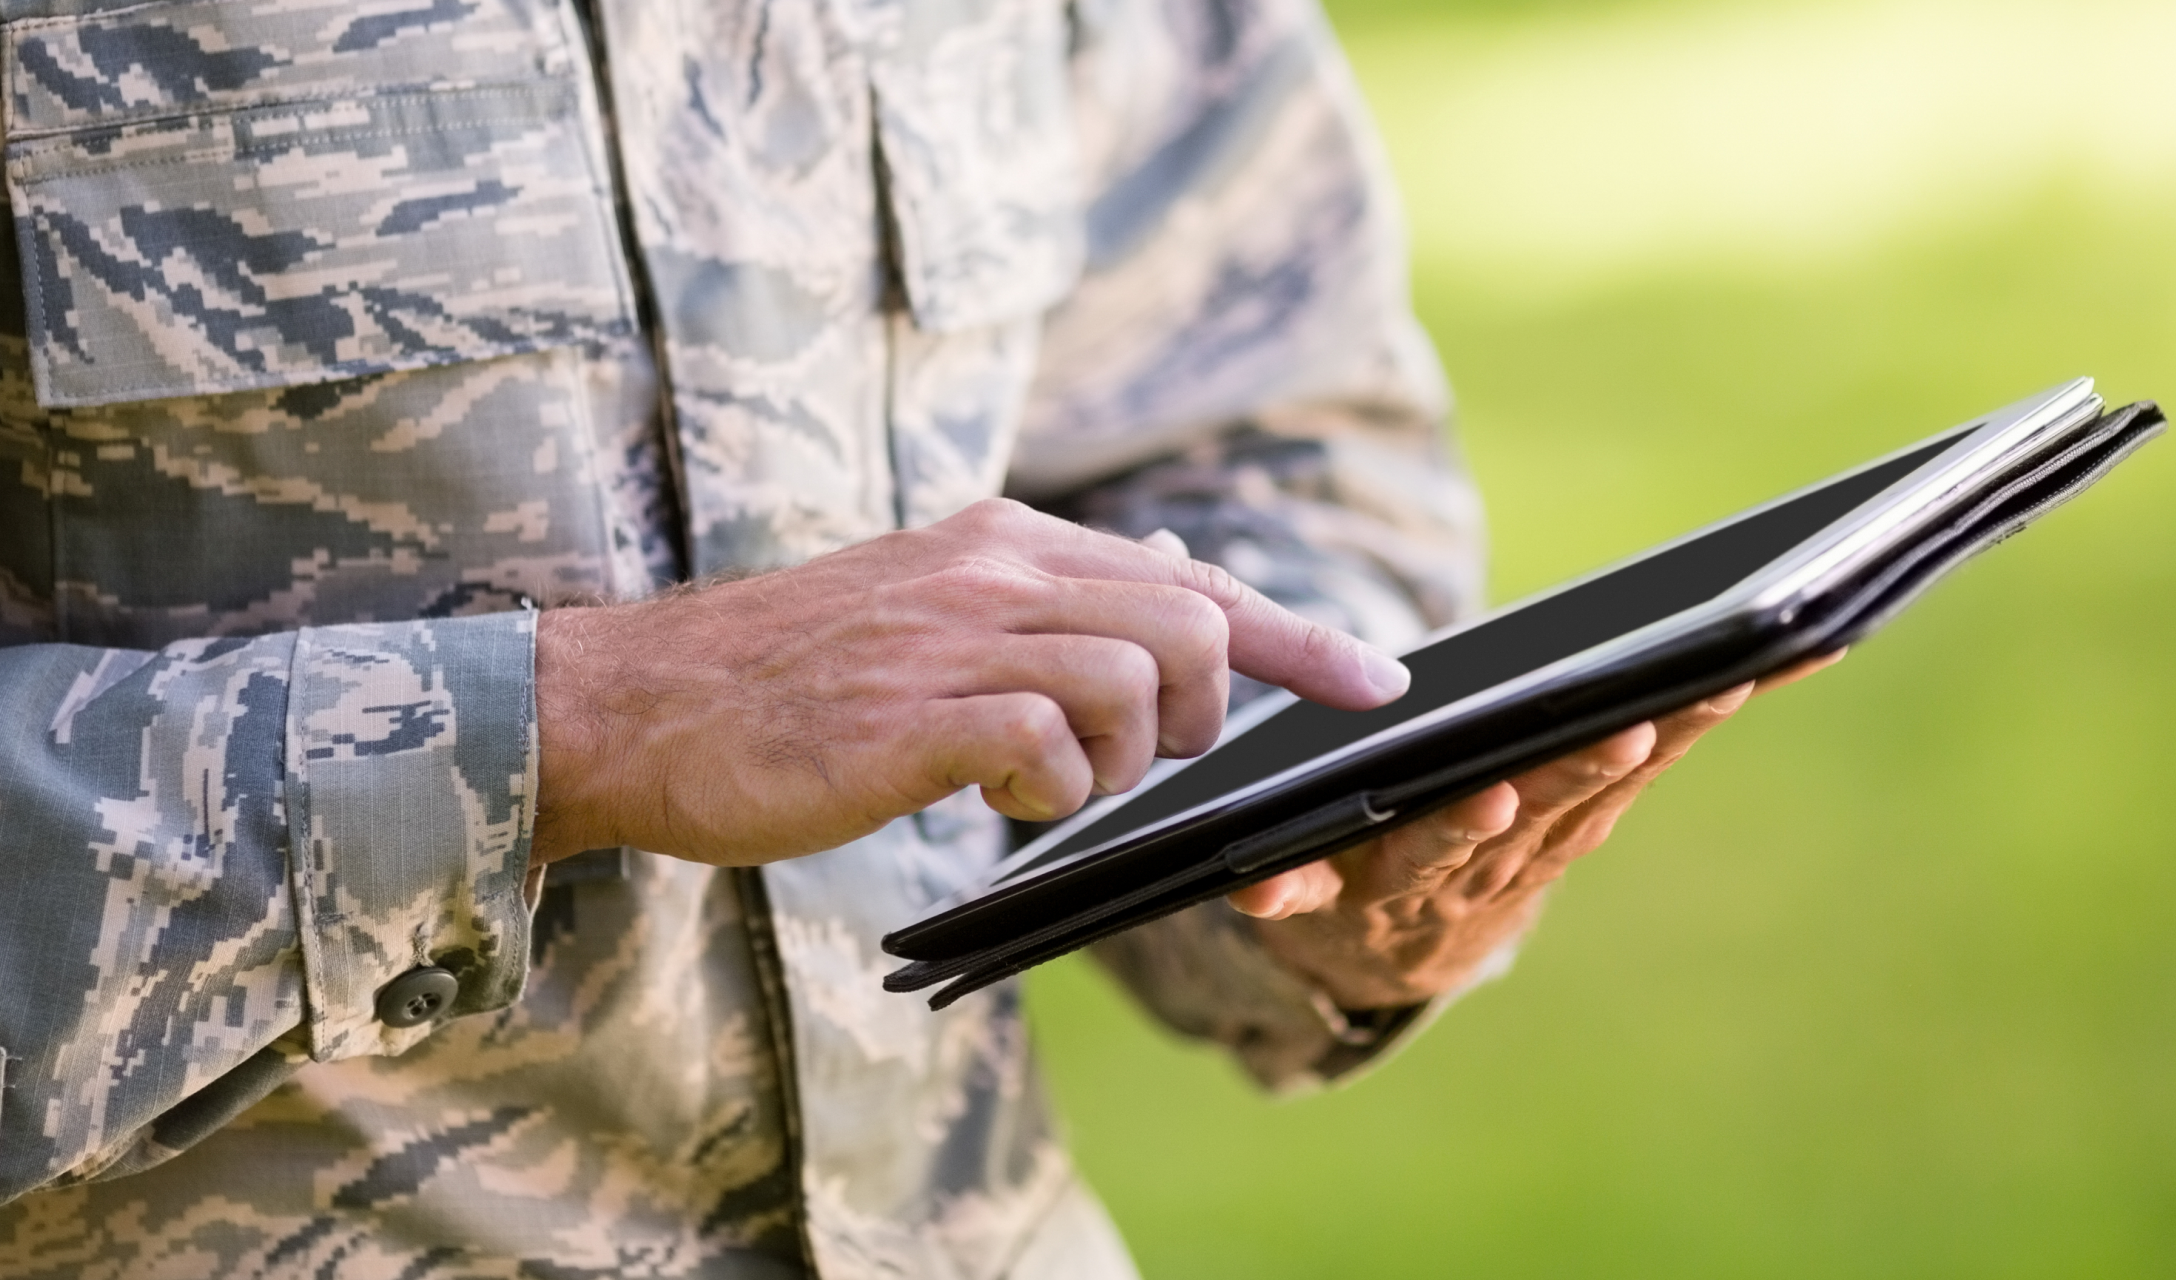 Infrastructure support tailored to the educational environment of military personnel